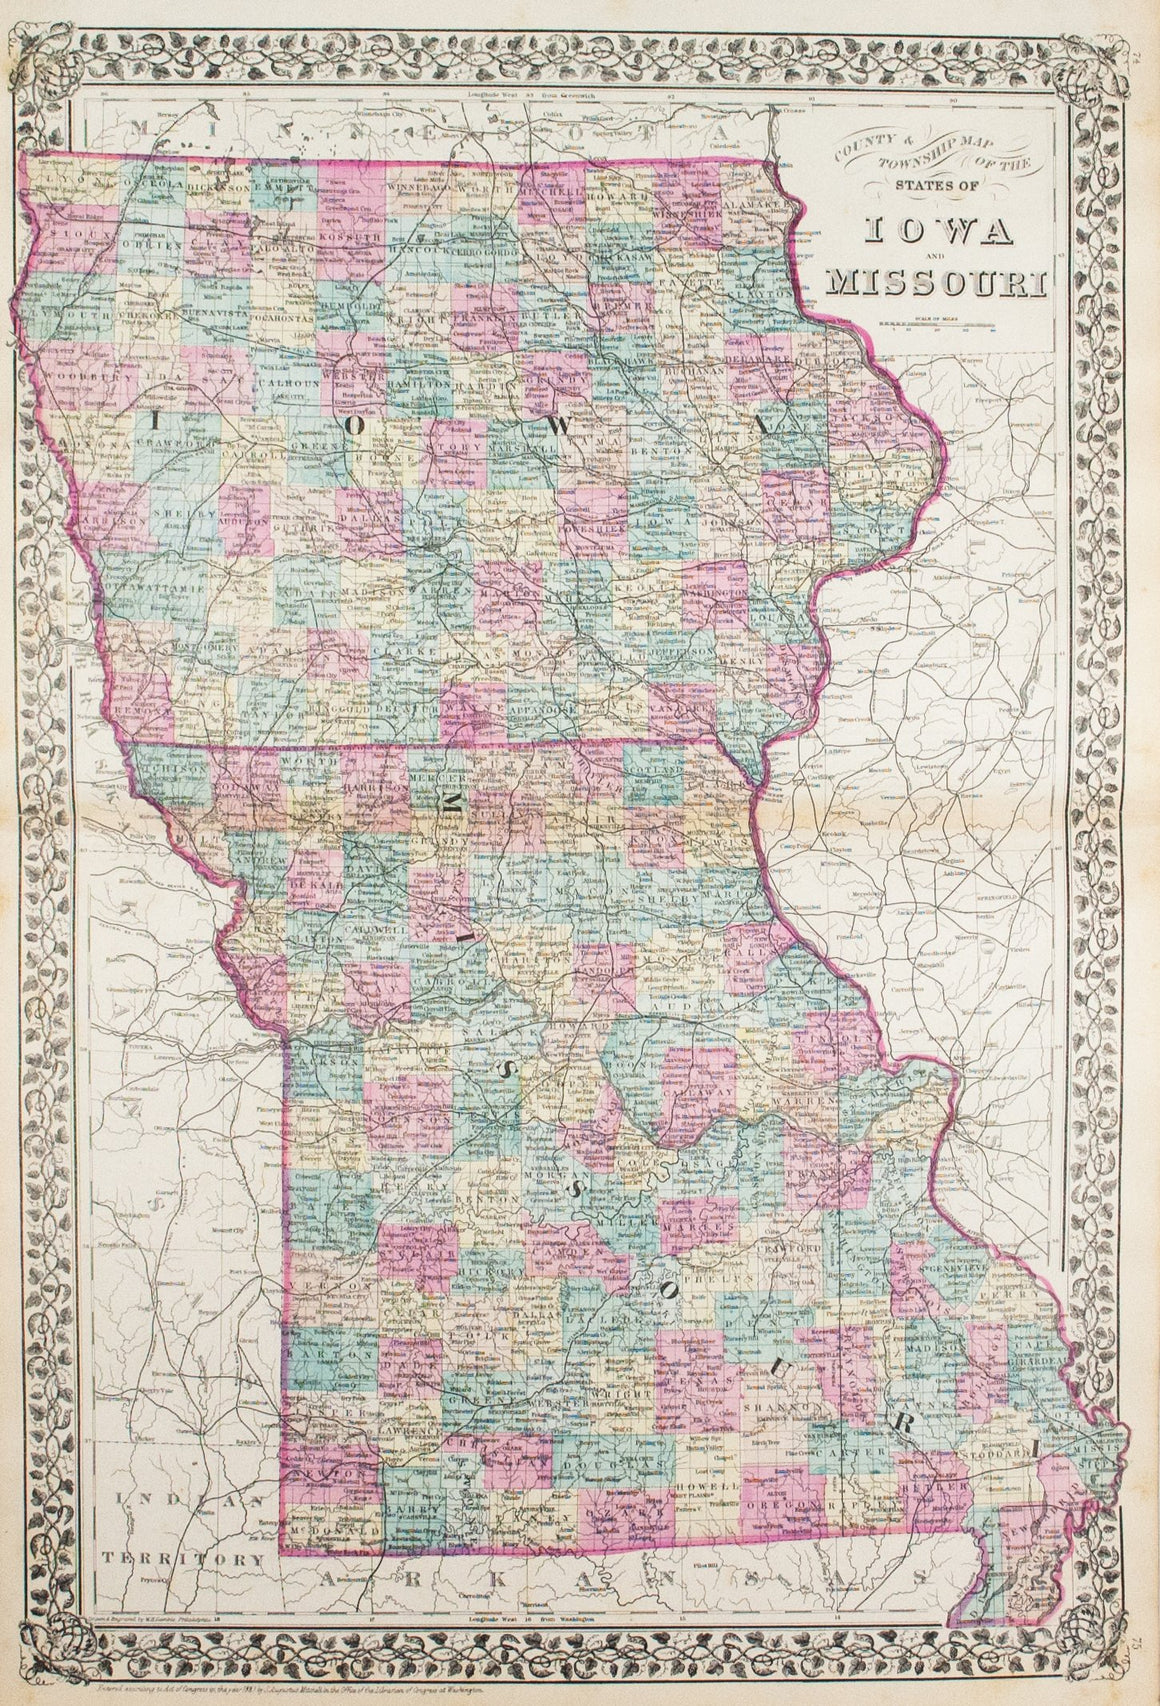 1881 County & Township Map of the States of Iowa and Missouri - S Mitchell Jr